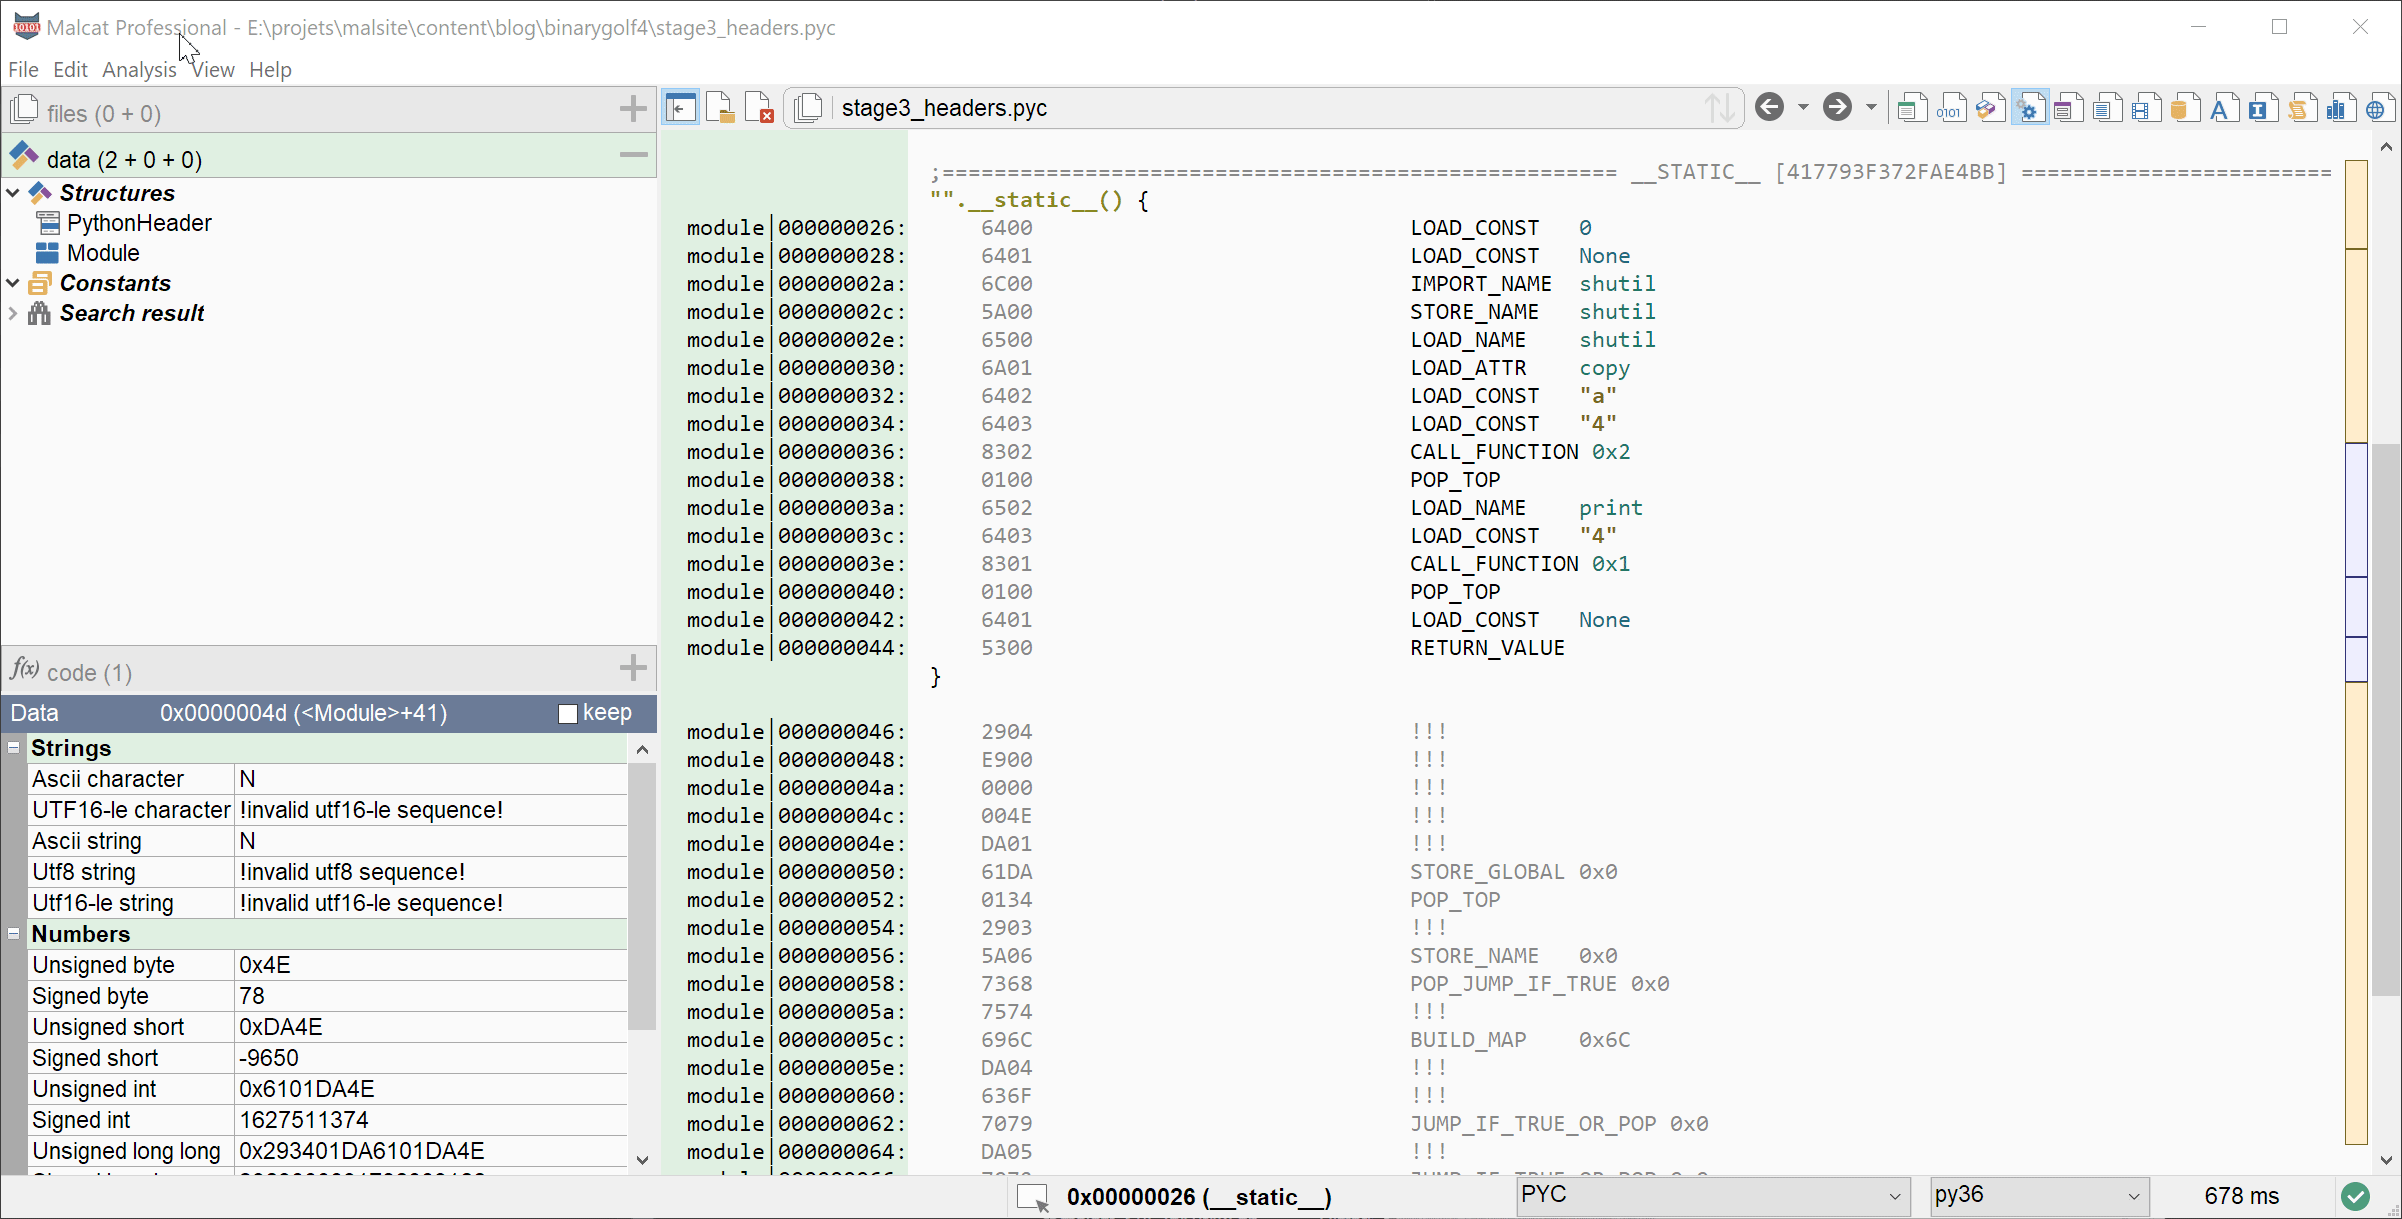 Patching the bytecode to save 12 bytes